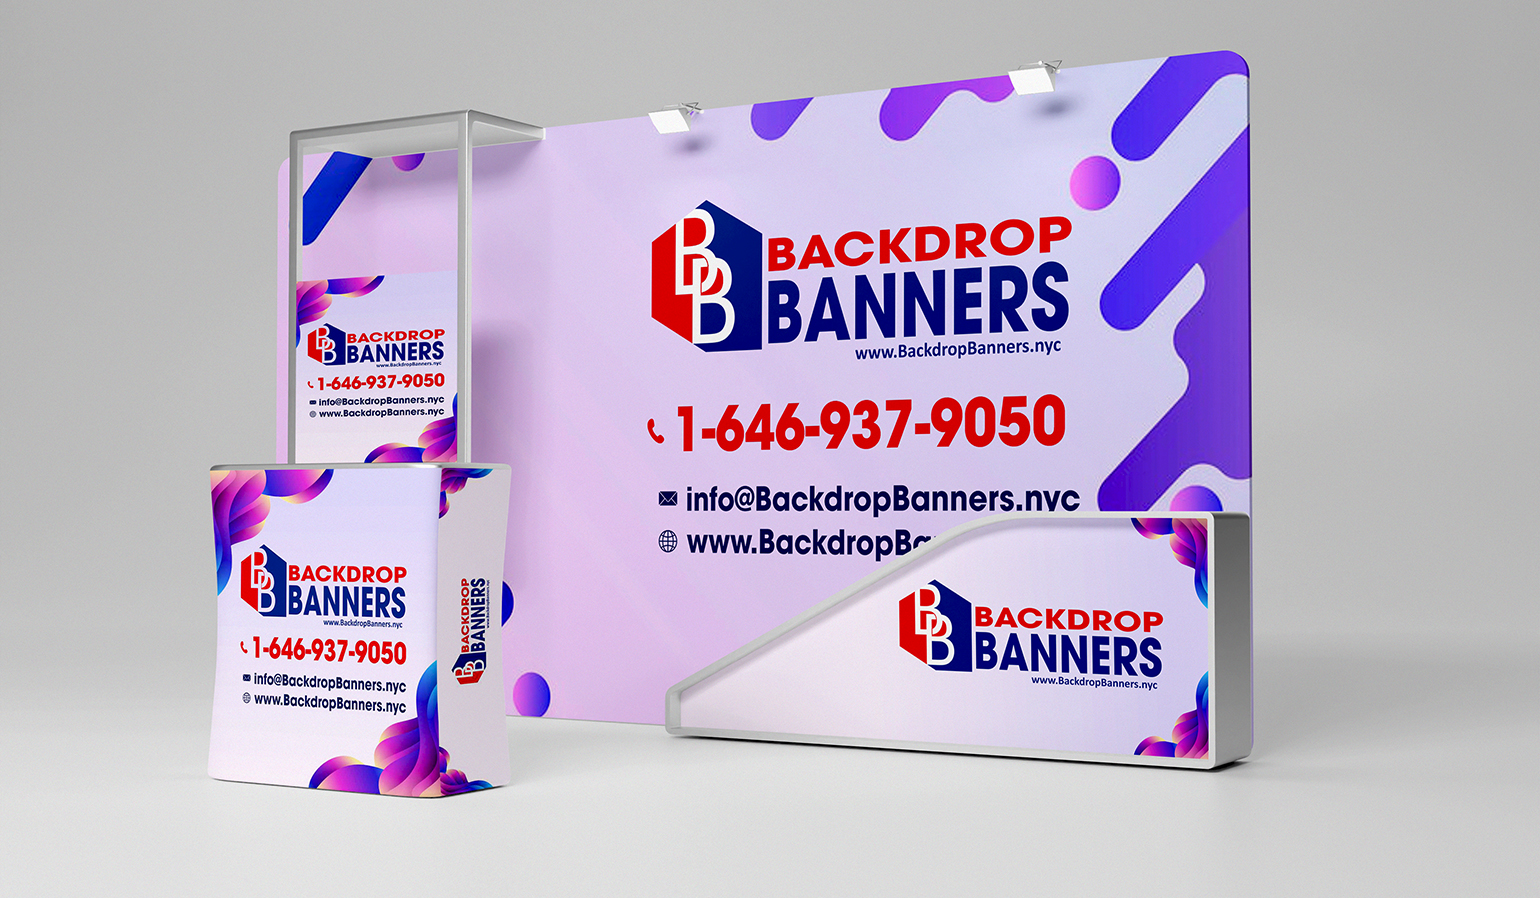 Customized Backdrop Banner